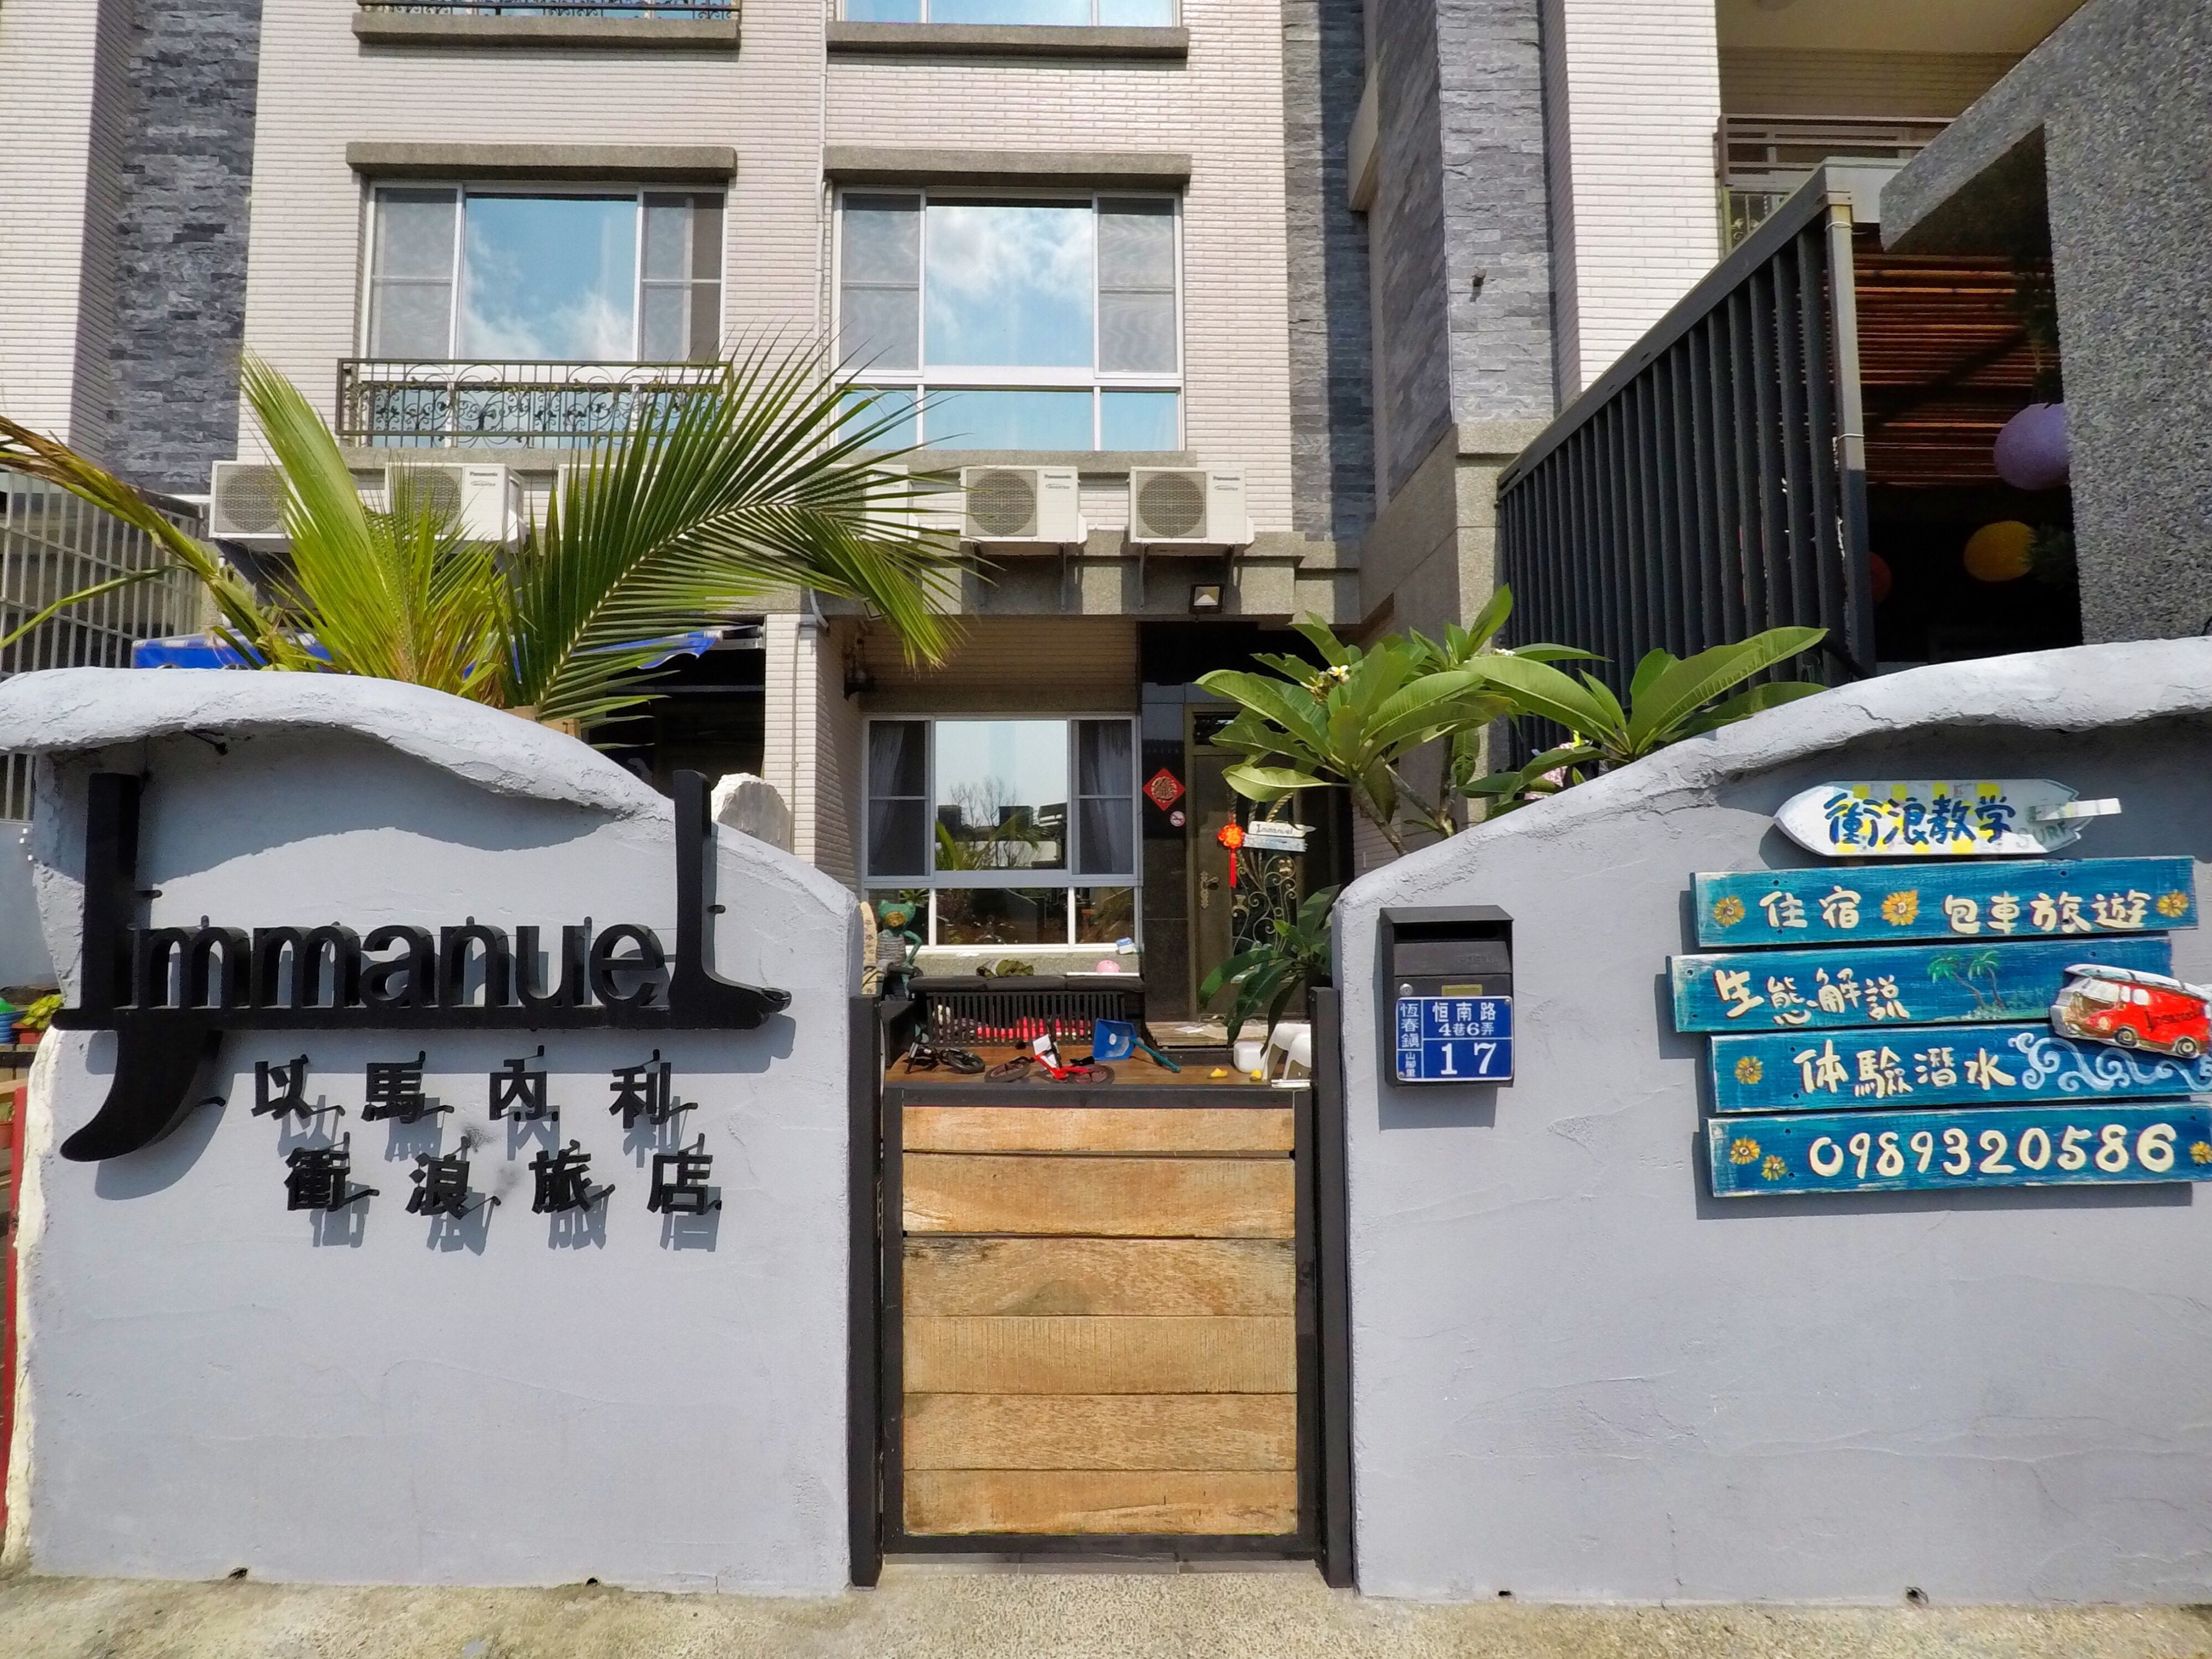  Immanuel Surf  Hostel:1 photos in total